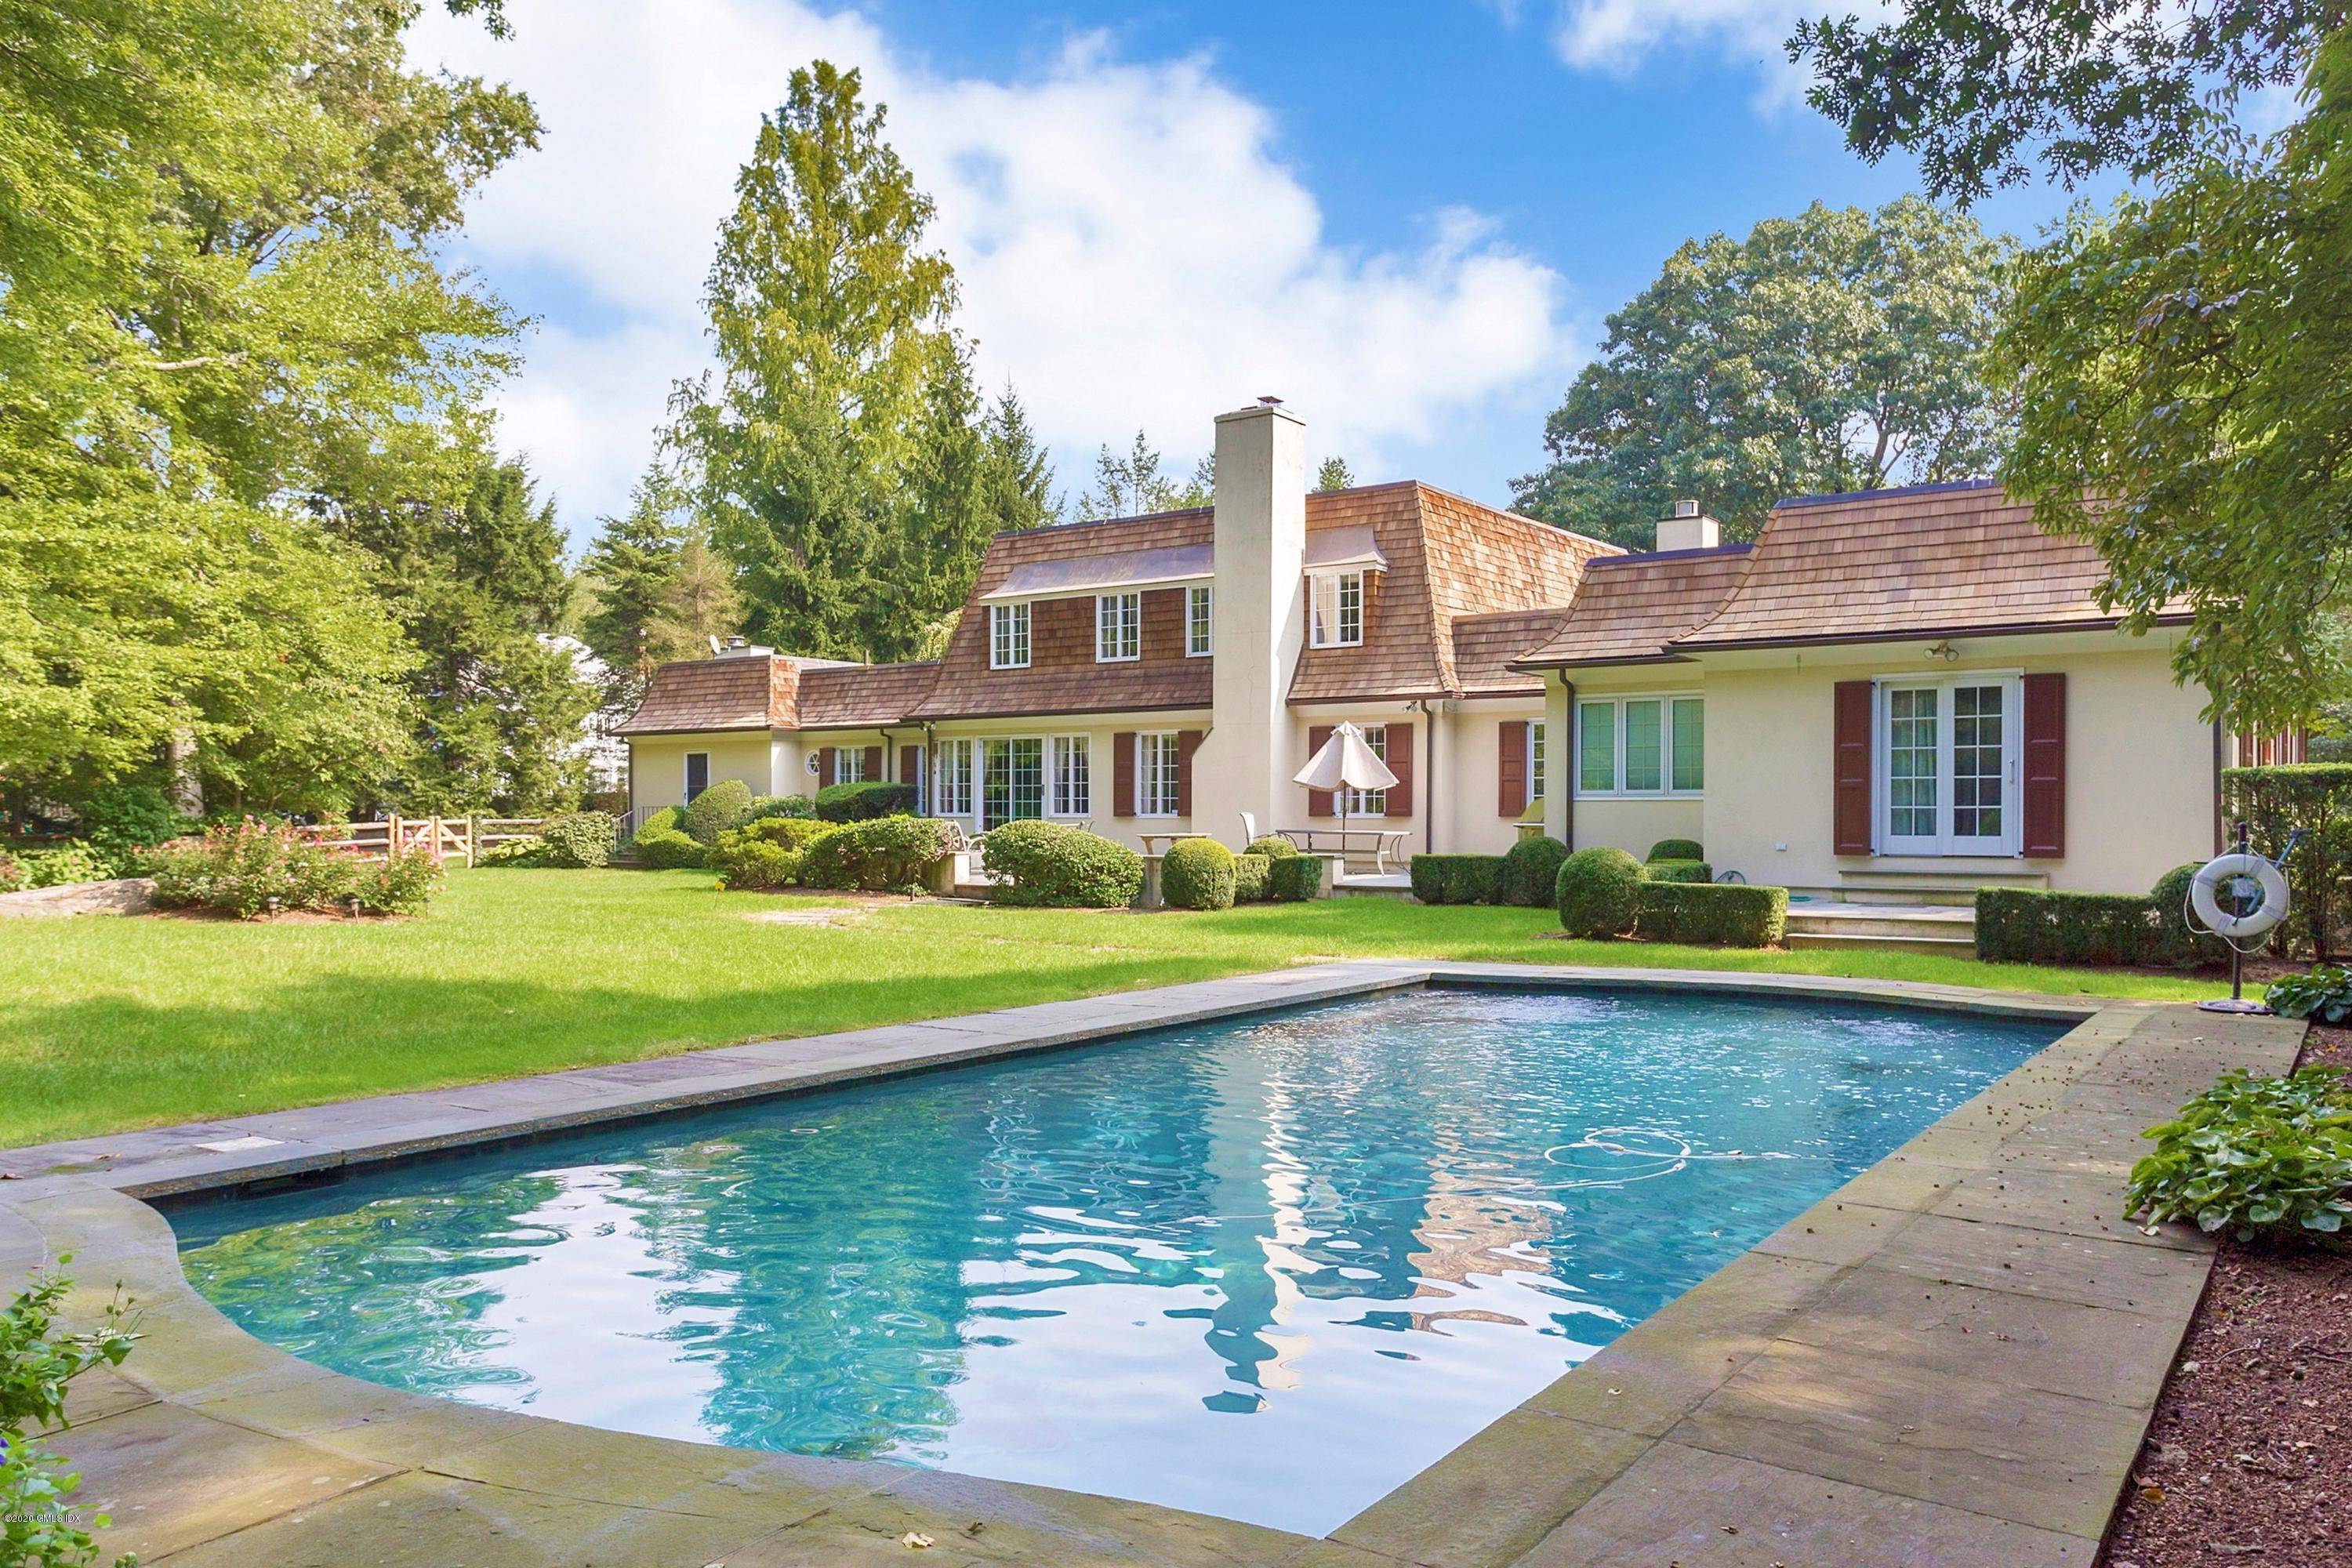 This unique mid country, European style home is situated on a cul de sac for privacy yet close to the best of Greenwich shops restaurants.